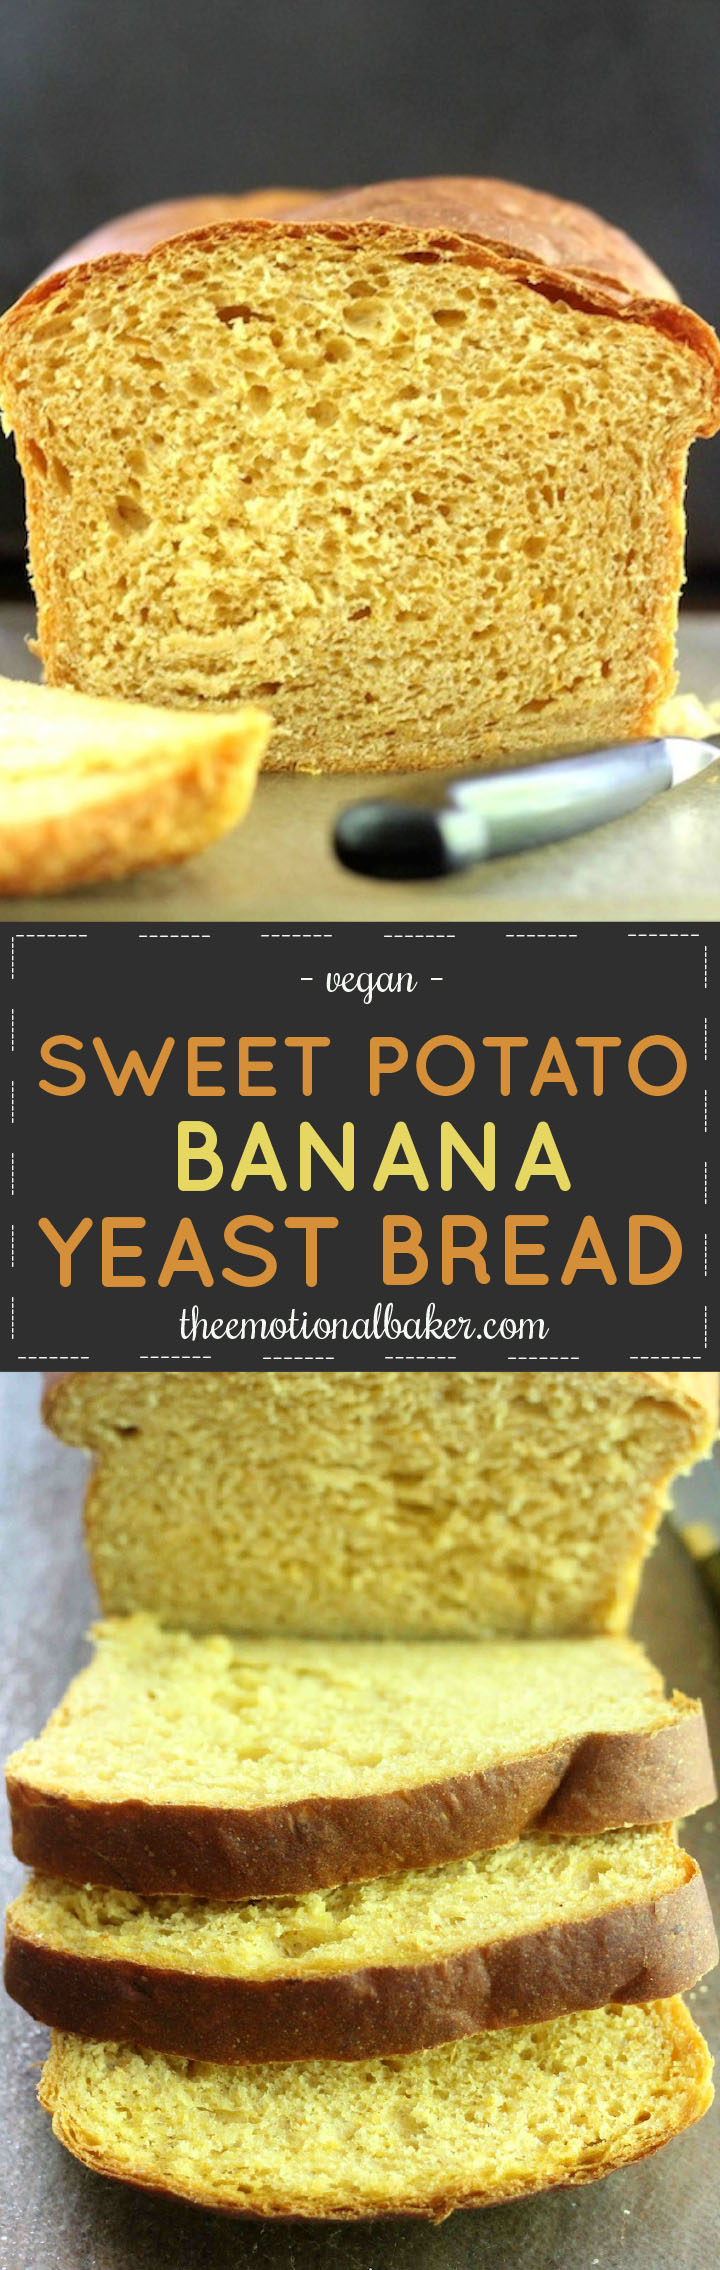 Everyone can make homemade bread! This recipe for Sweet Potato Banana Bread is easy and yields a moist, beautiful loaf perfect for fall and Thanksgiving.